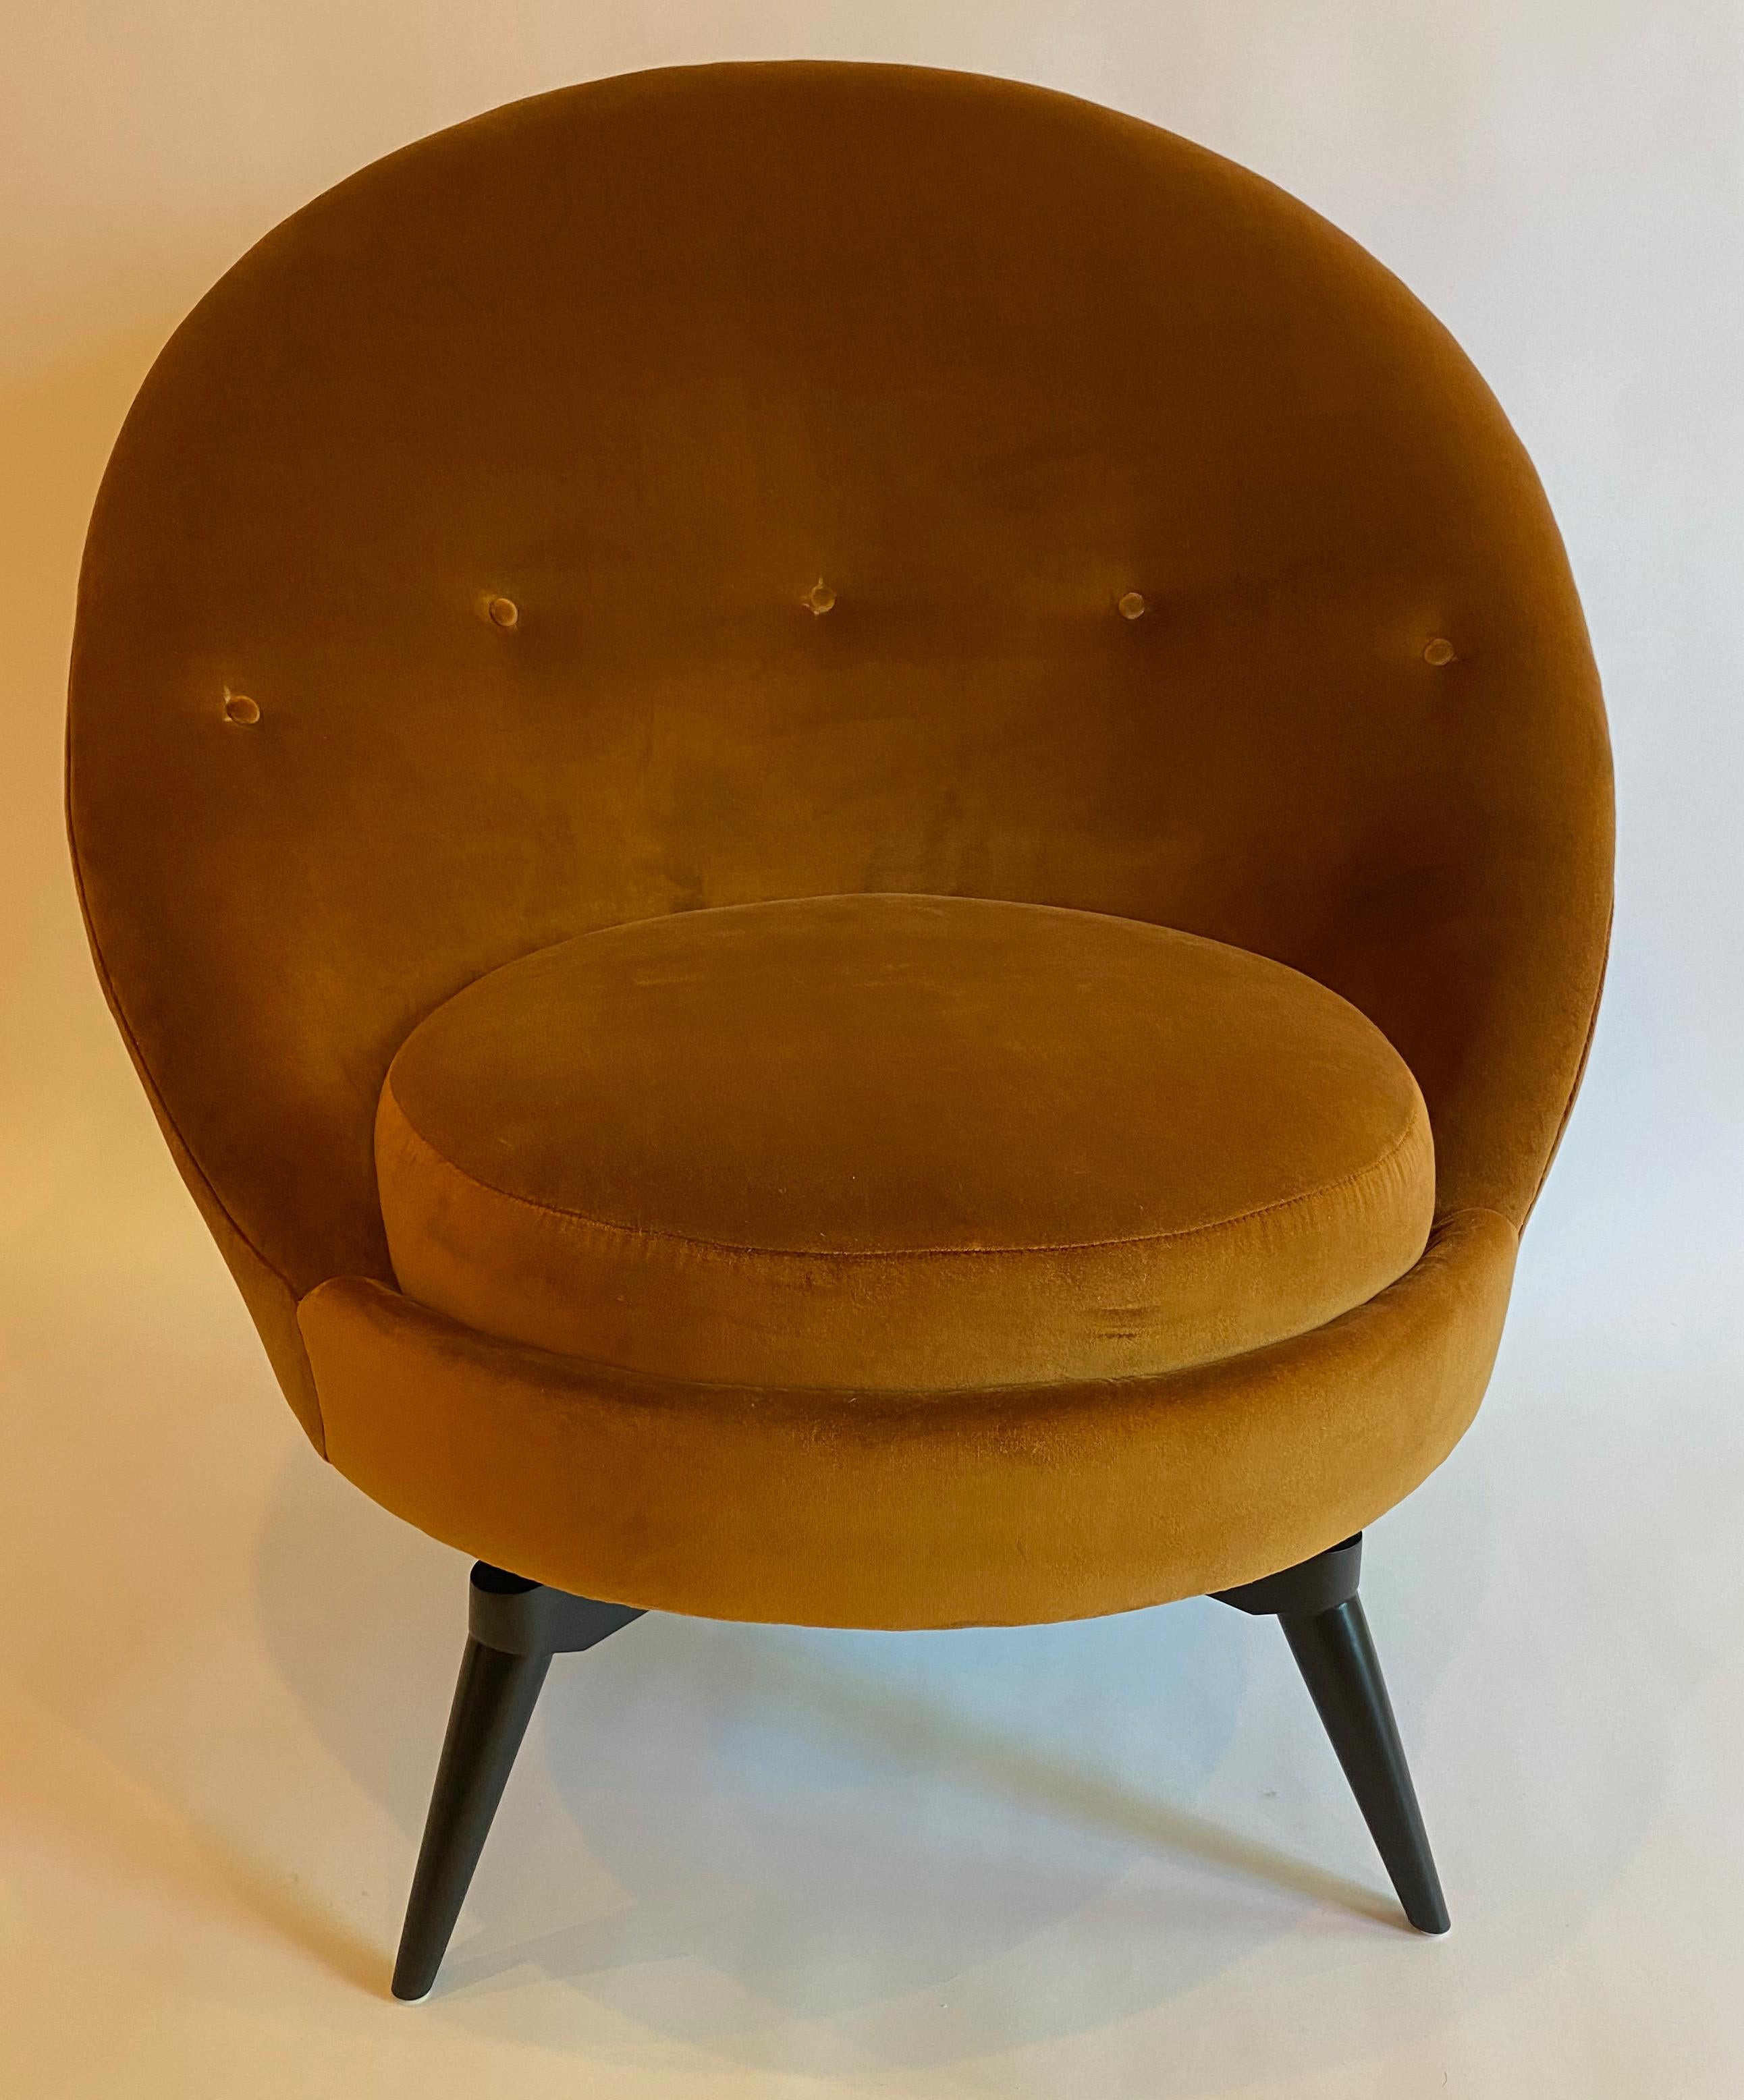 Swivel egg chair in the French midcentury style. This sophisticated chair is upholstered in heavy-weight burnt orange/gold velvet. This super stylish and versatile example is as comfortable as it looks and is painstakingly patterned with a hardwood